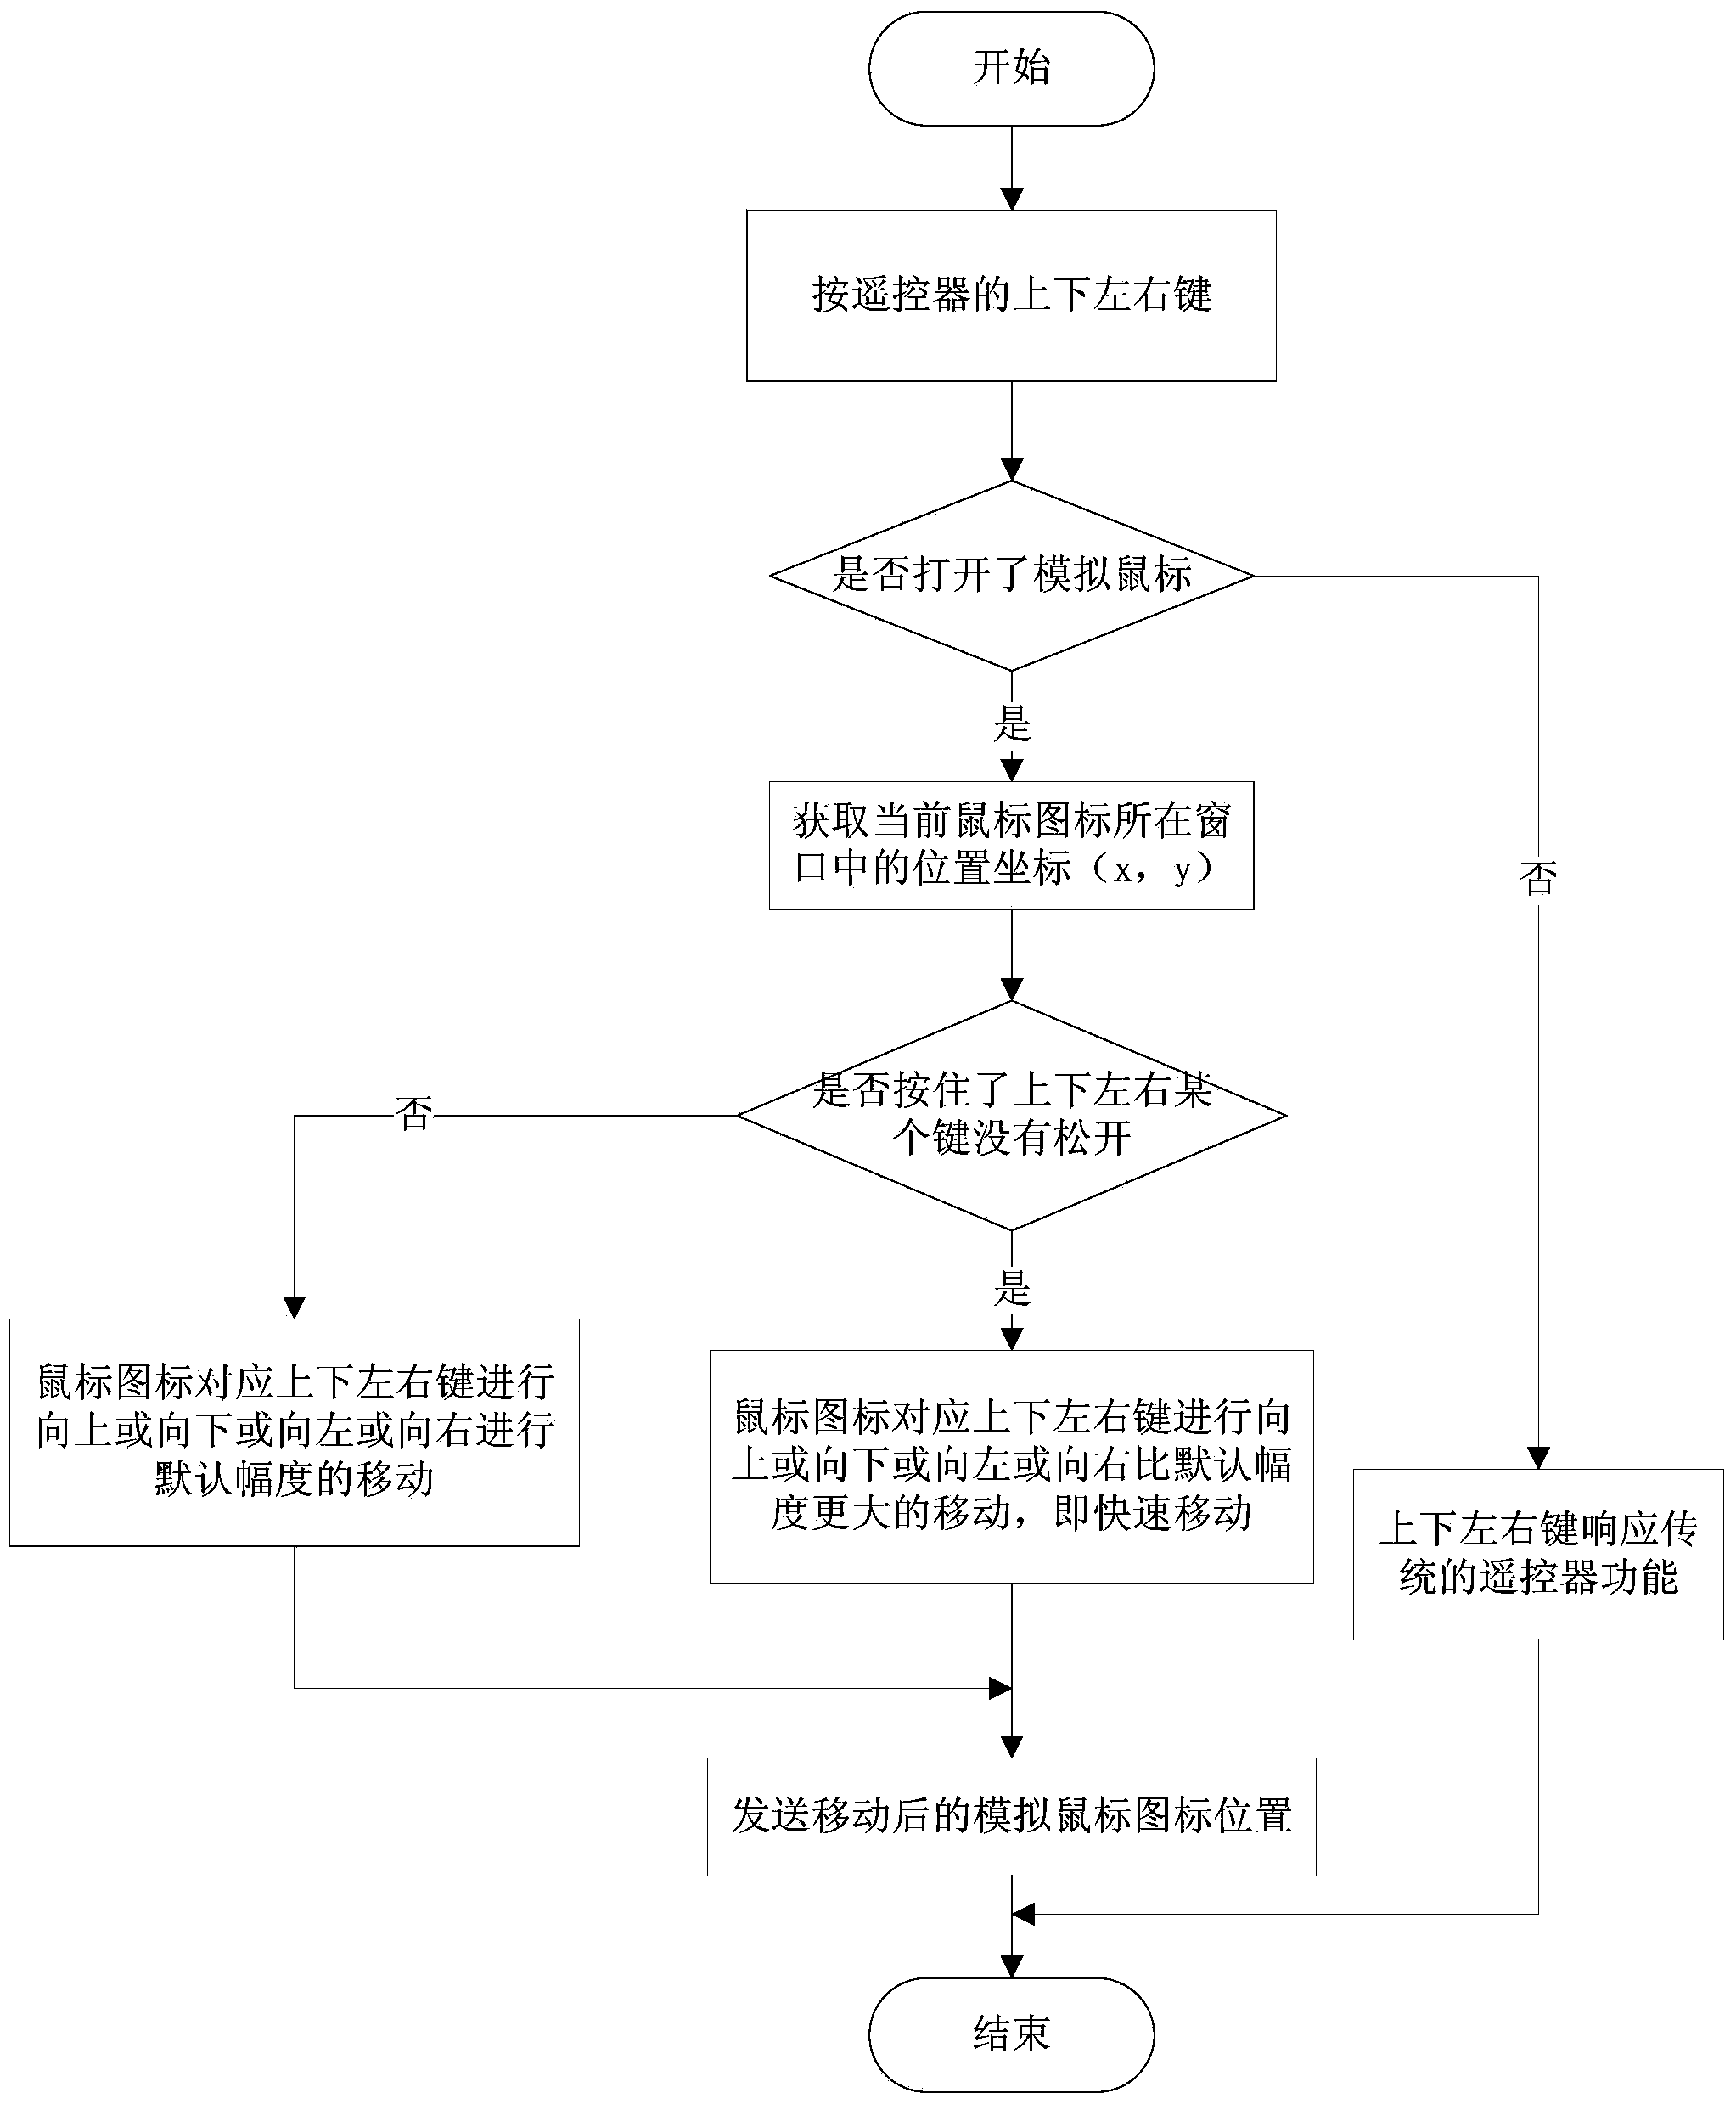 Method for simulating mouse with remote controller